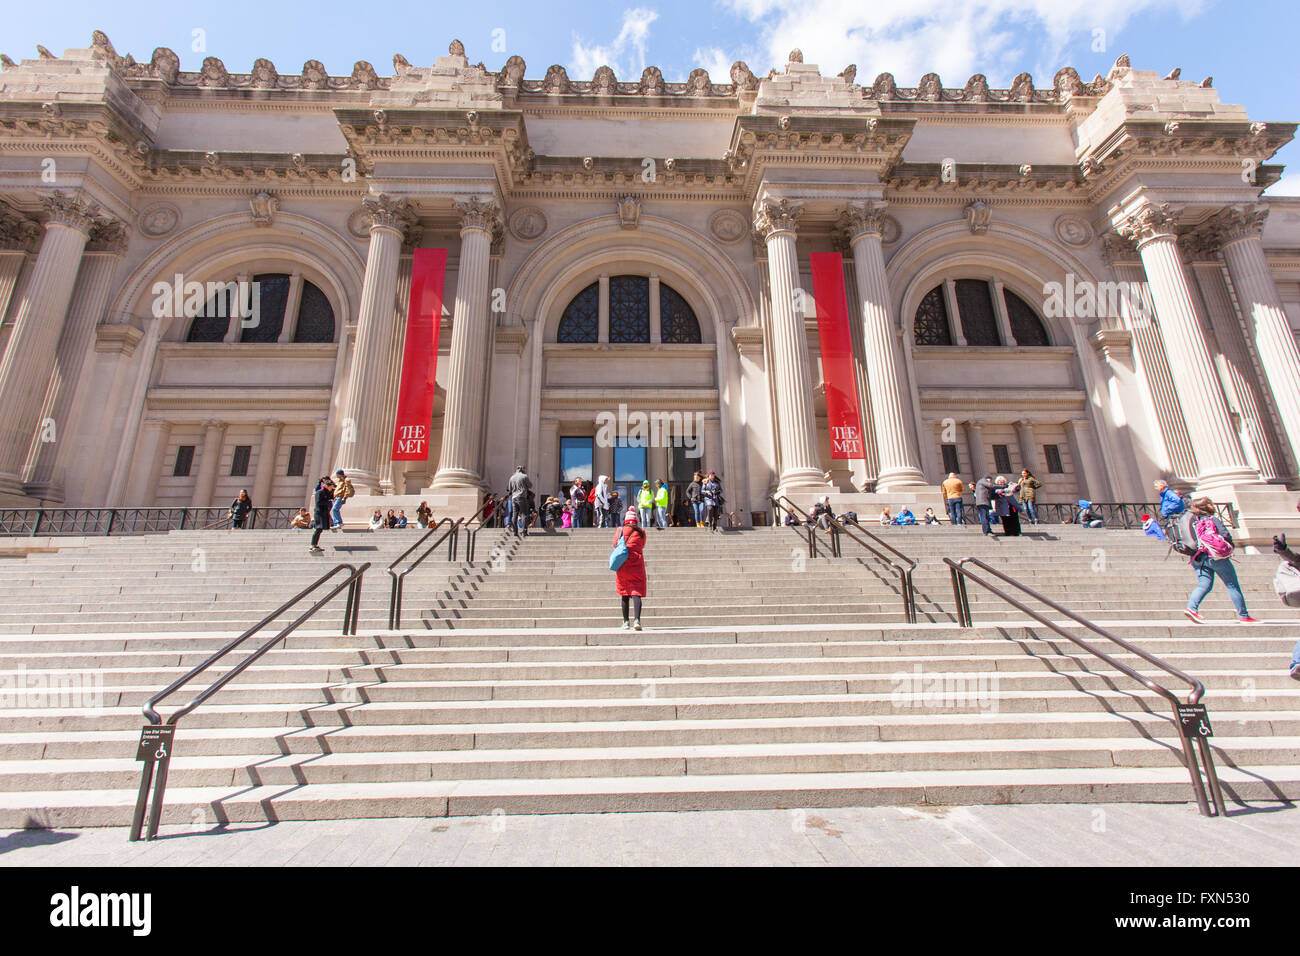 Entrance to The Metropolitan Museum of Art. New York City, United States of America. Stock Photo